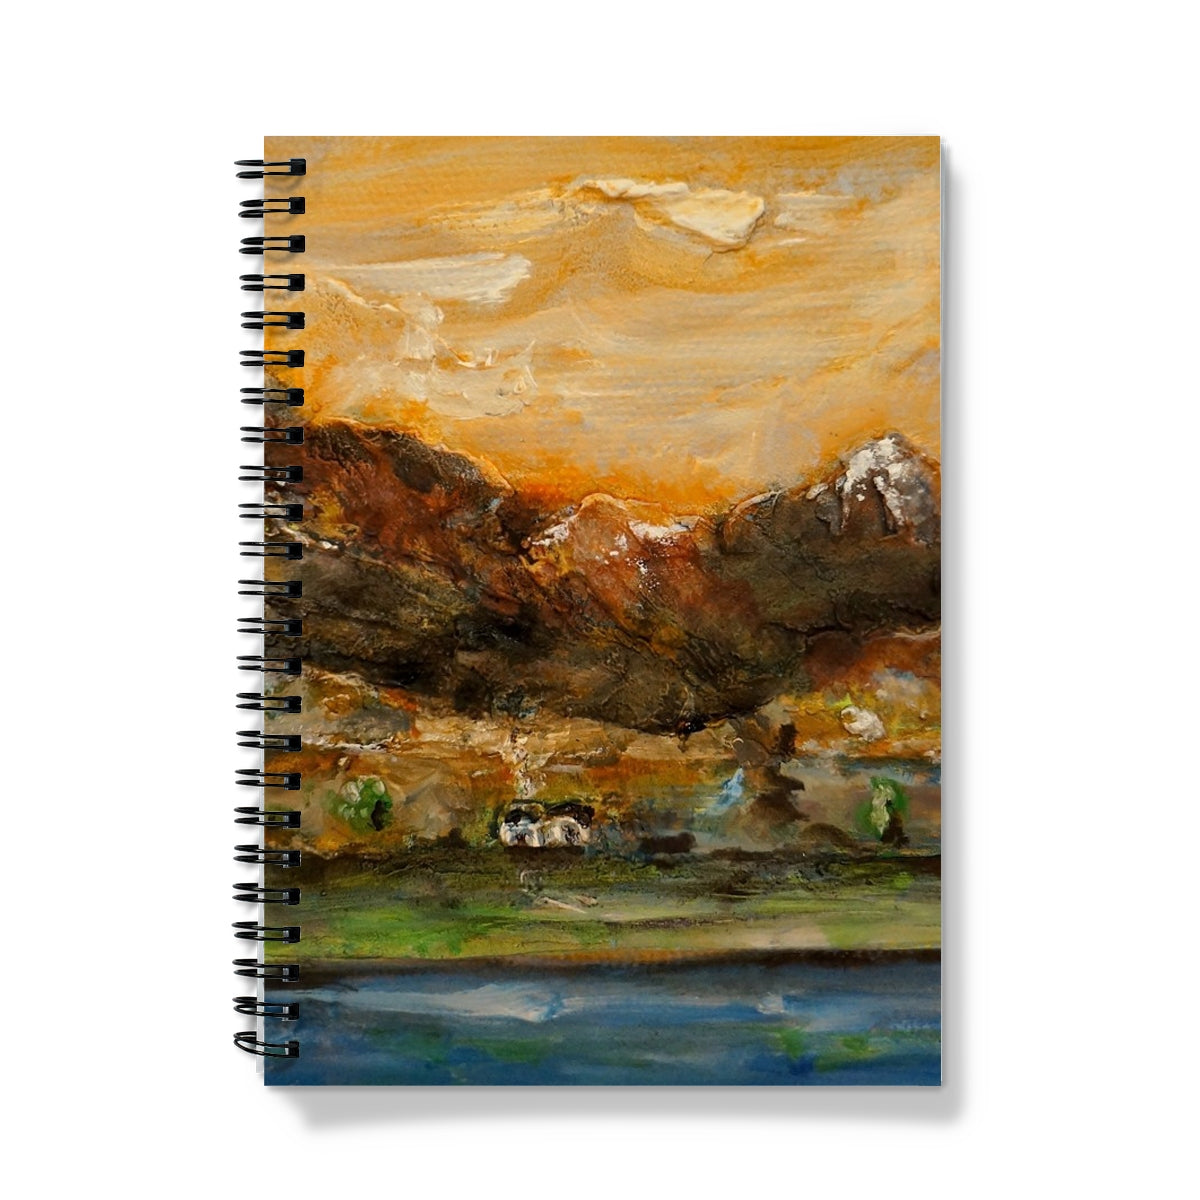 A Glencoe Cottage Art Gifts Notebook-Journals & Notebooks-Glencoe Art Gallery-A4-Lined-Paintings, Prints, Homeware, Art Gifts From Scotland By Scottish Artist Kevin Hunter